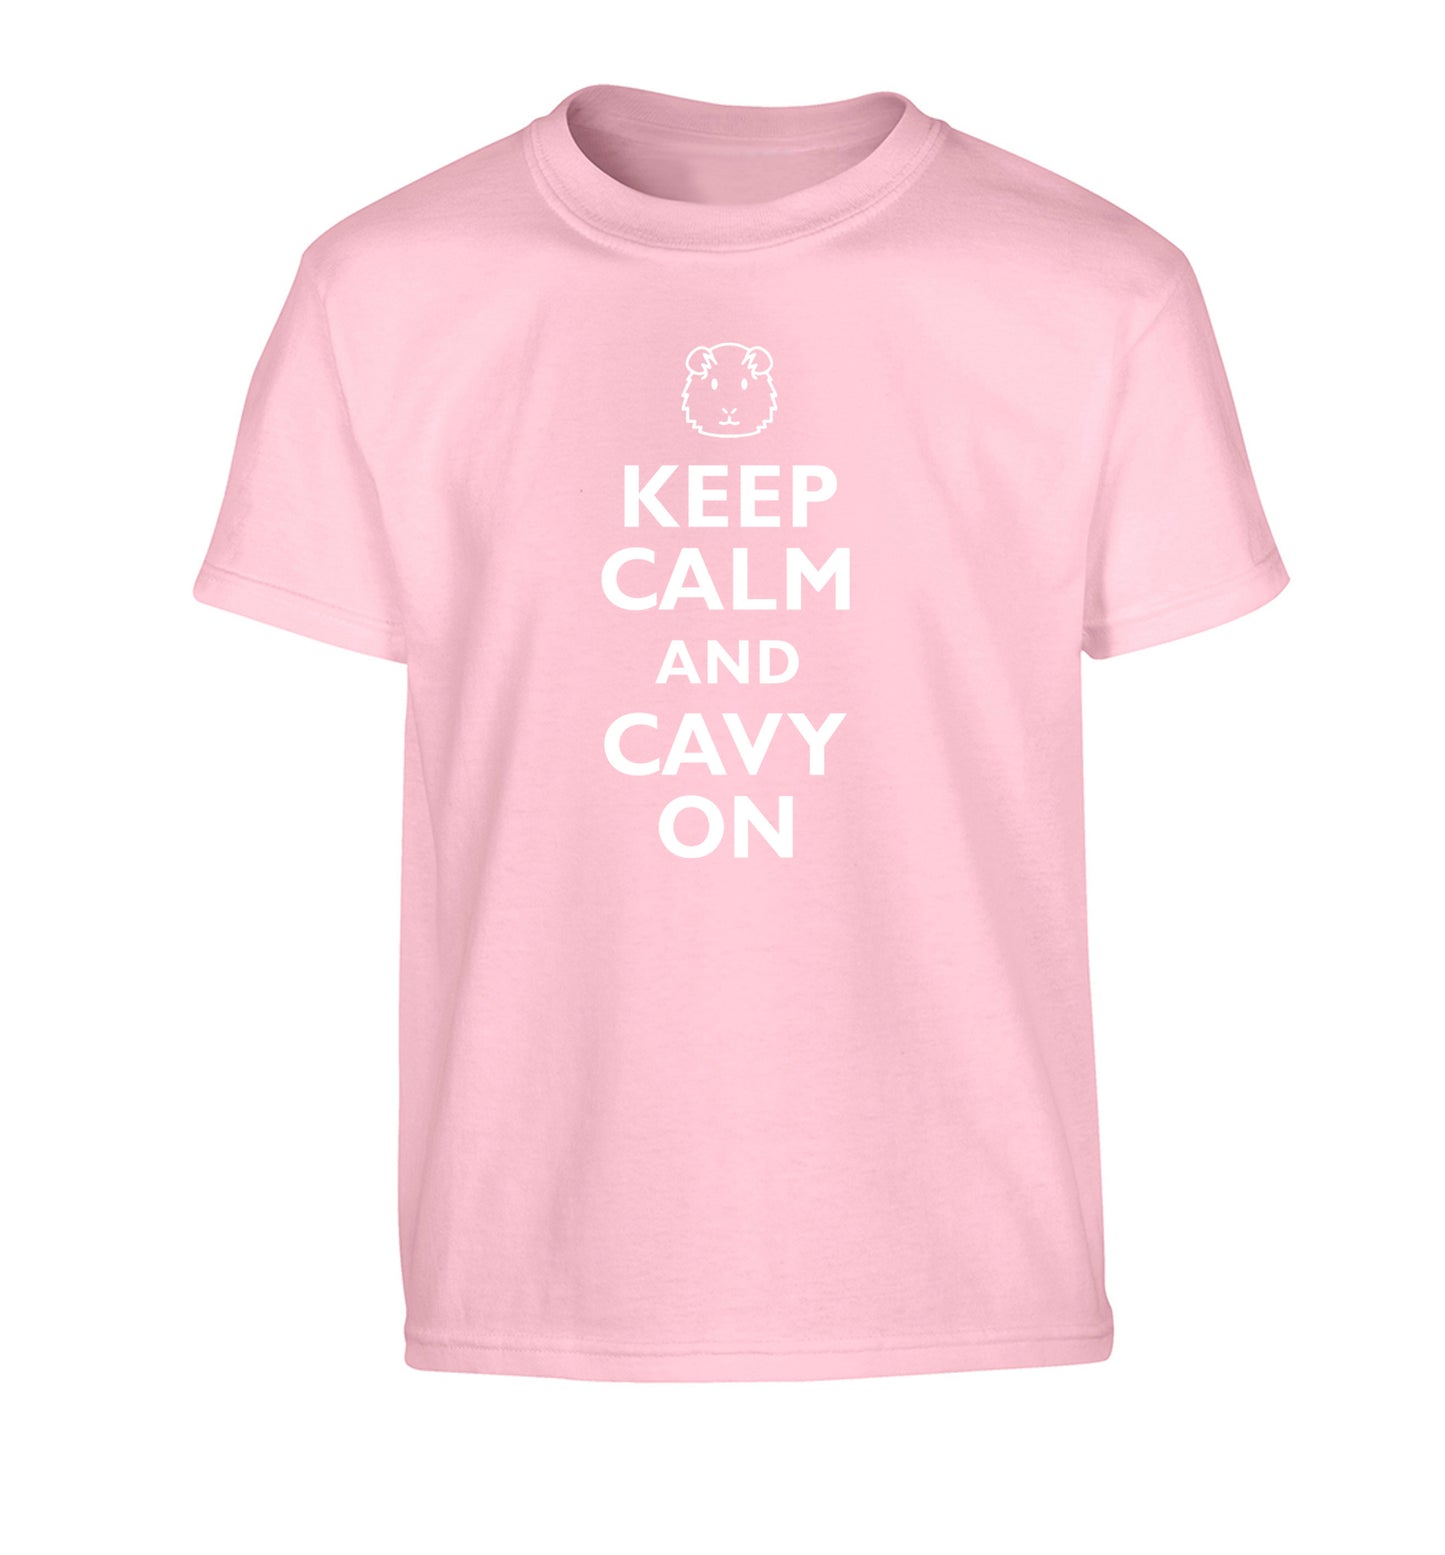 Keep calm and cavvy on Children's light pink Tshirt 12-14 Years